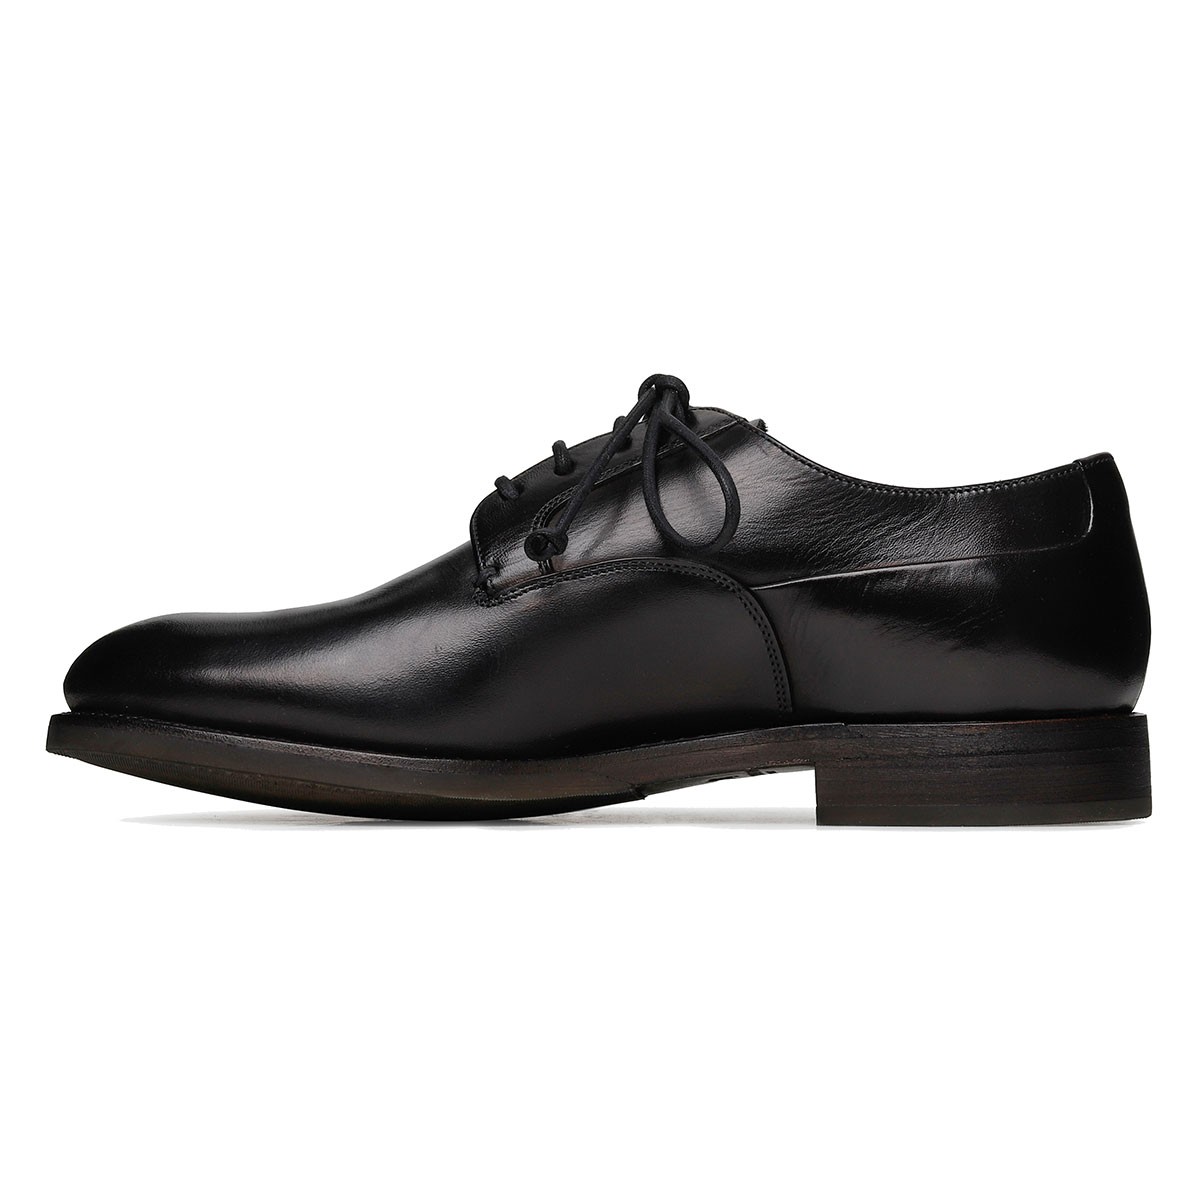 Firenze black leather Derby shoes